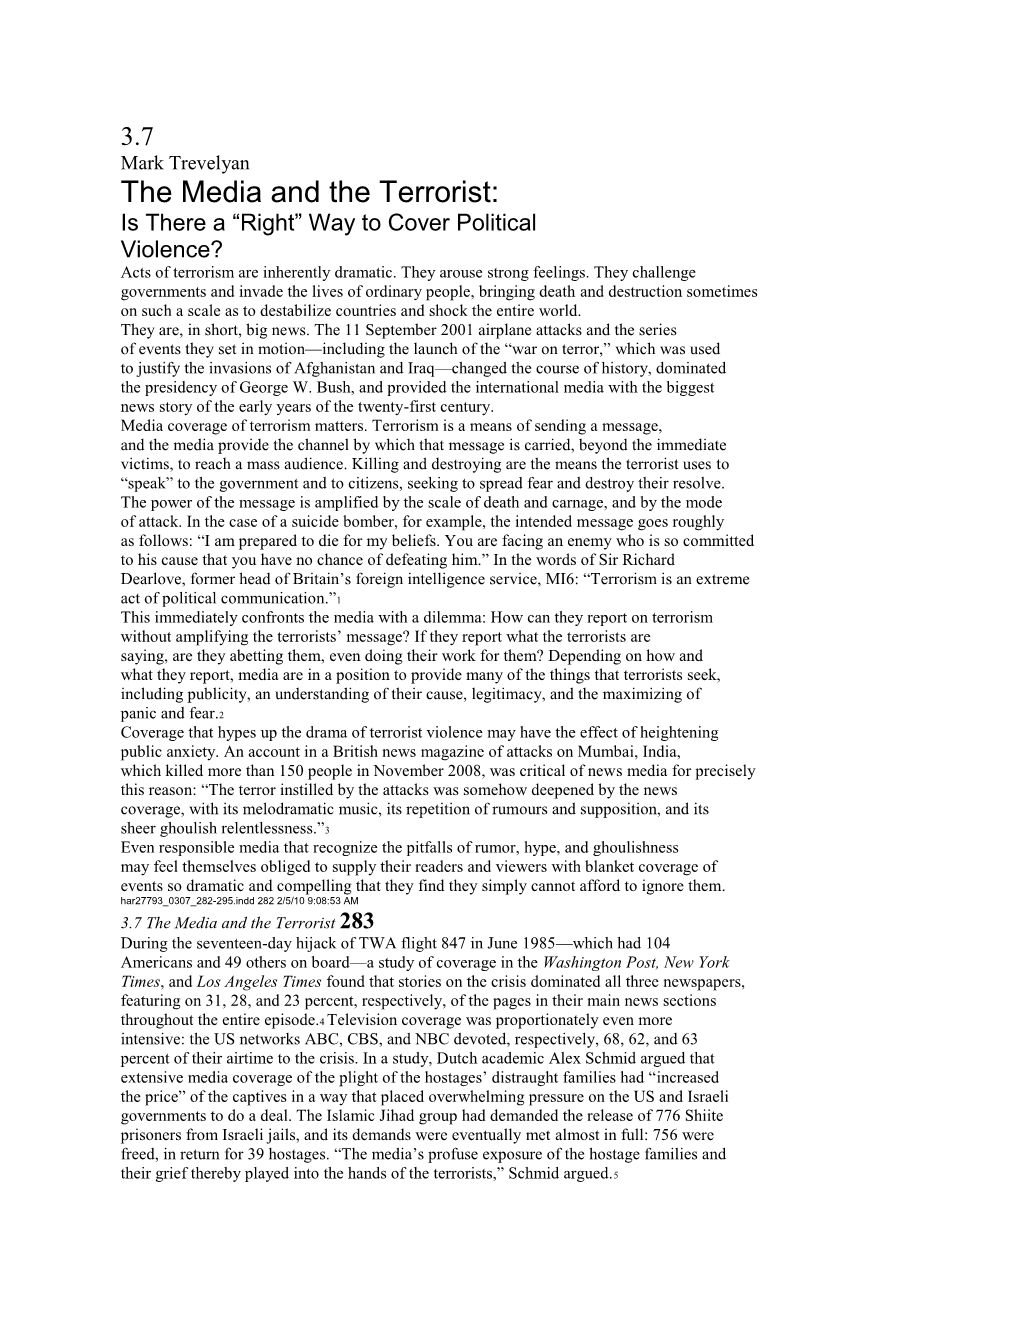 The Media and the Terrorist: Is There a “Right” Way to Cover Political Violence? Acts of Terrorism Are Inherently Dramatic